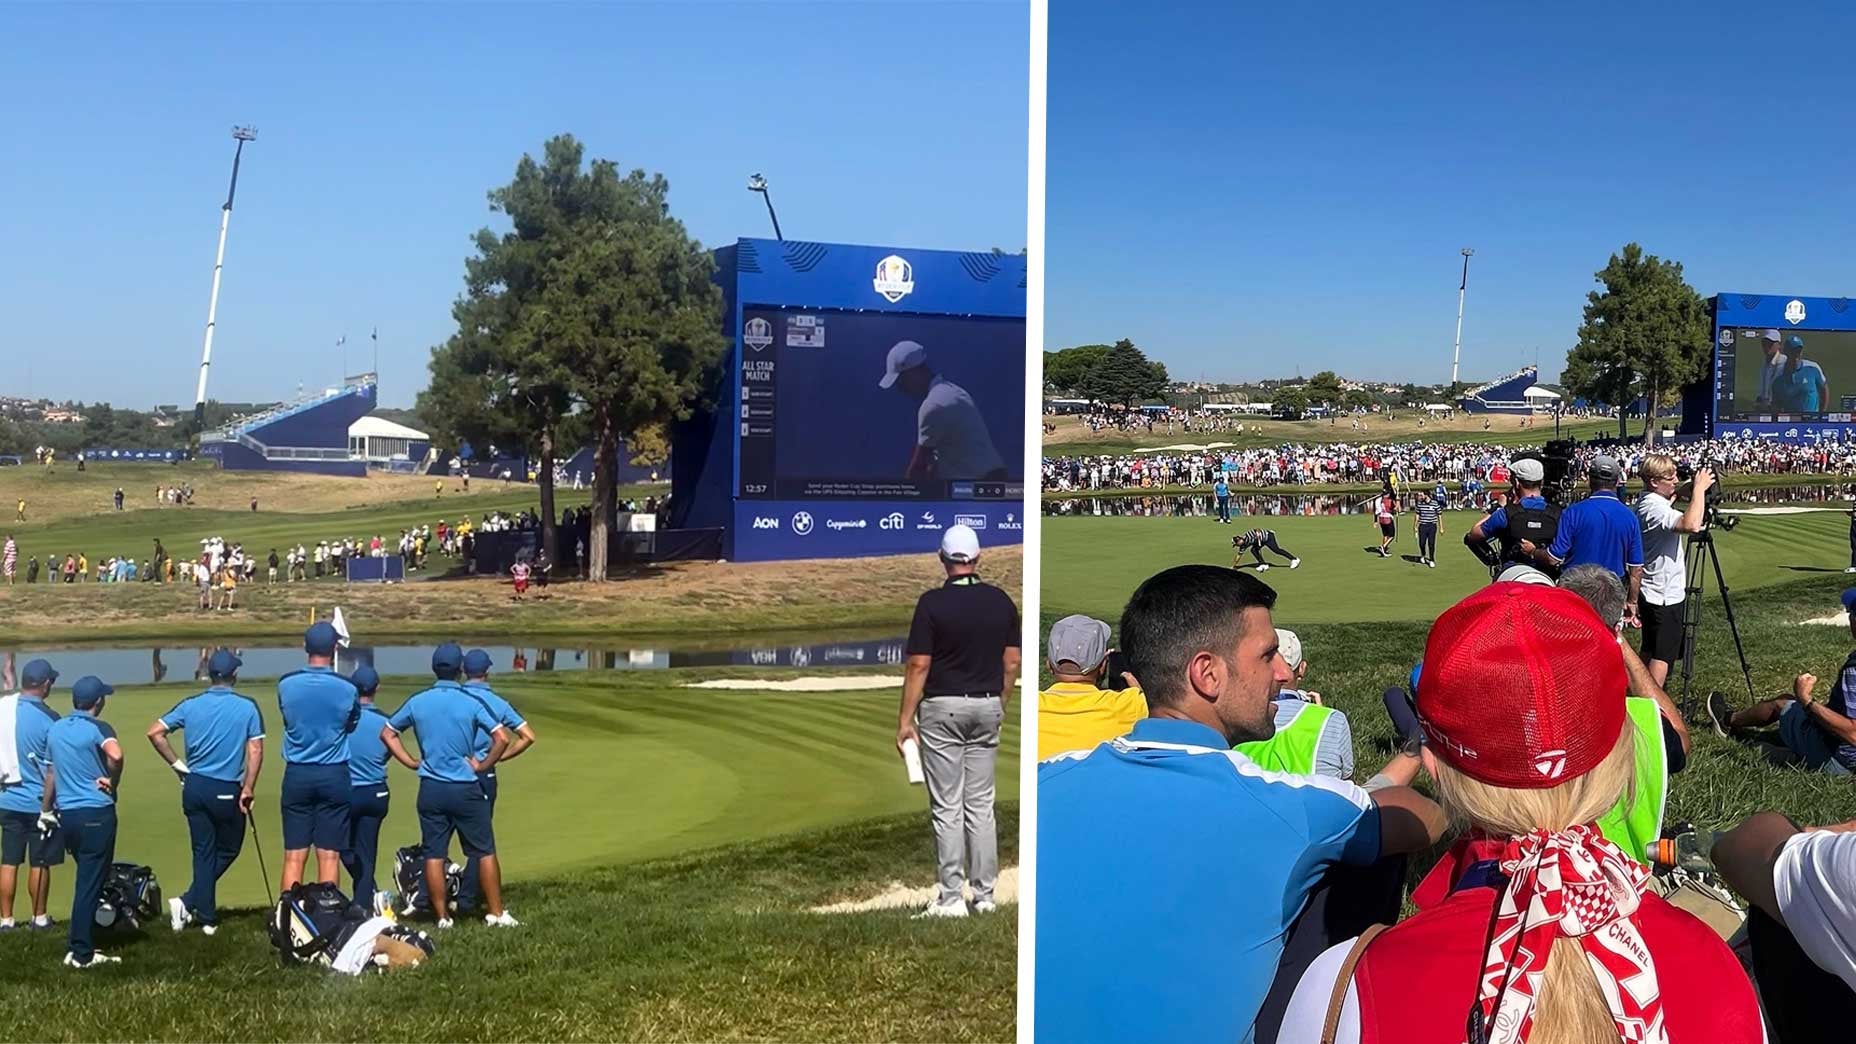 9 things we saw at the Ryder Cup and Solheim Cup on wild golf Eurotrip